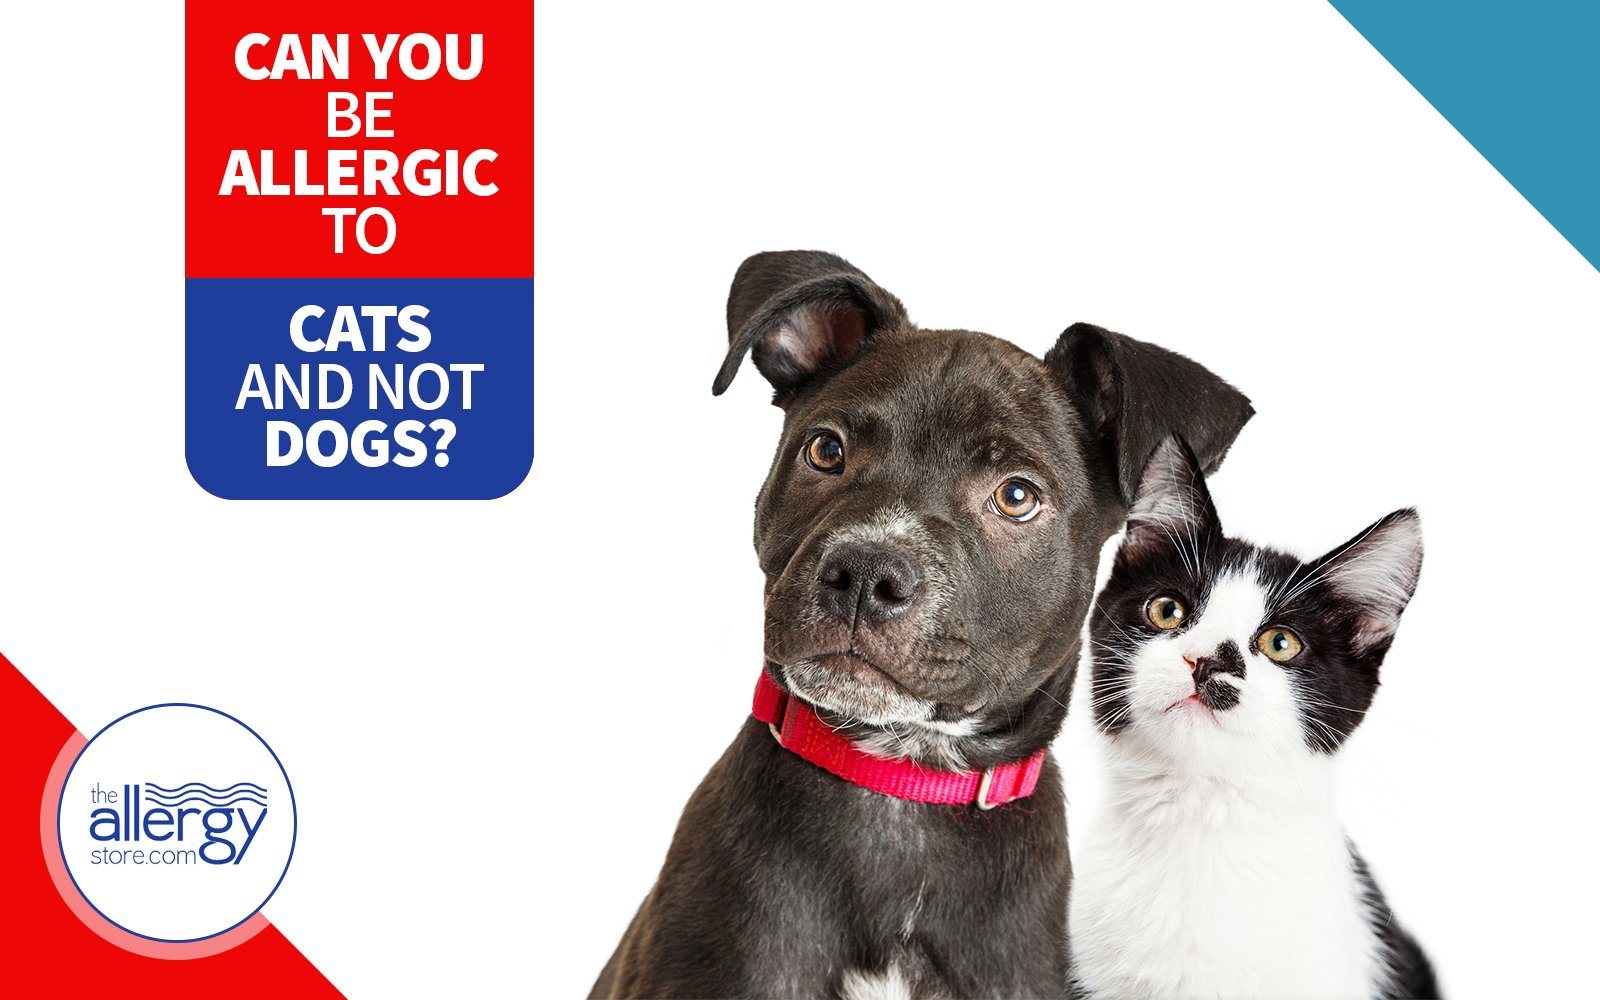 Can You Be Allergic To Cats And Not Dogs 9411489a 5a8f 463b 843c 5b4436982714 2048x ?v=1573593900